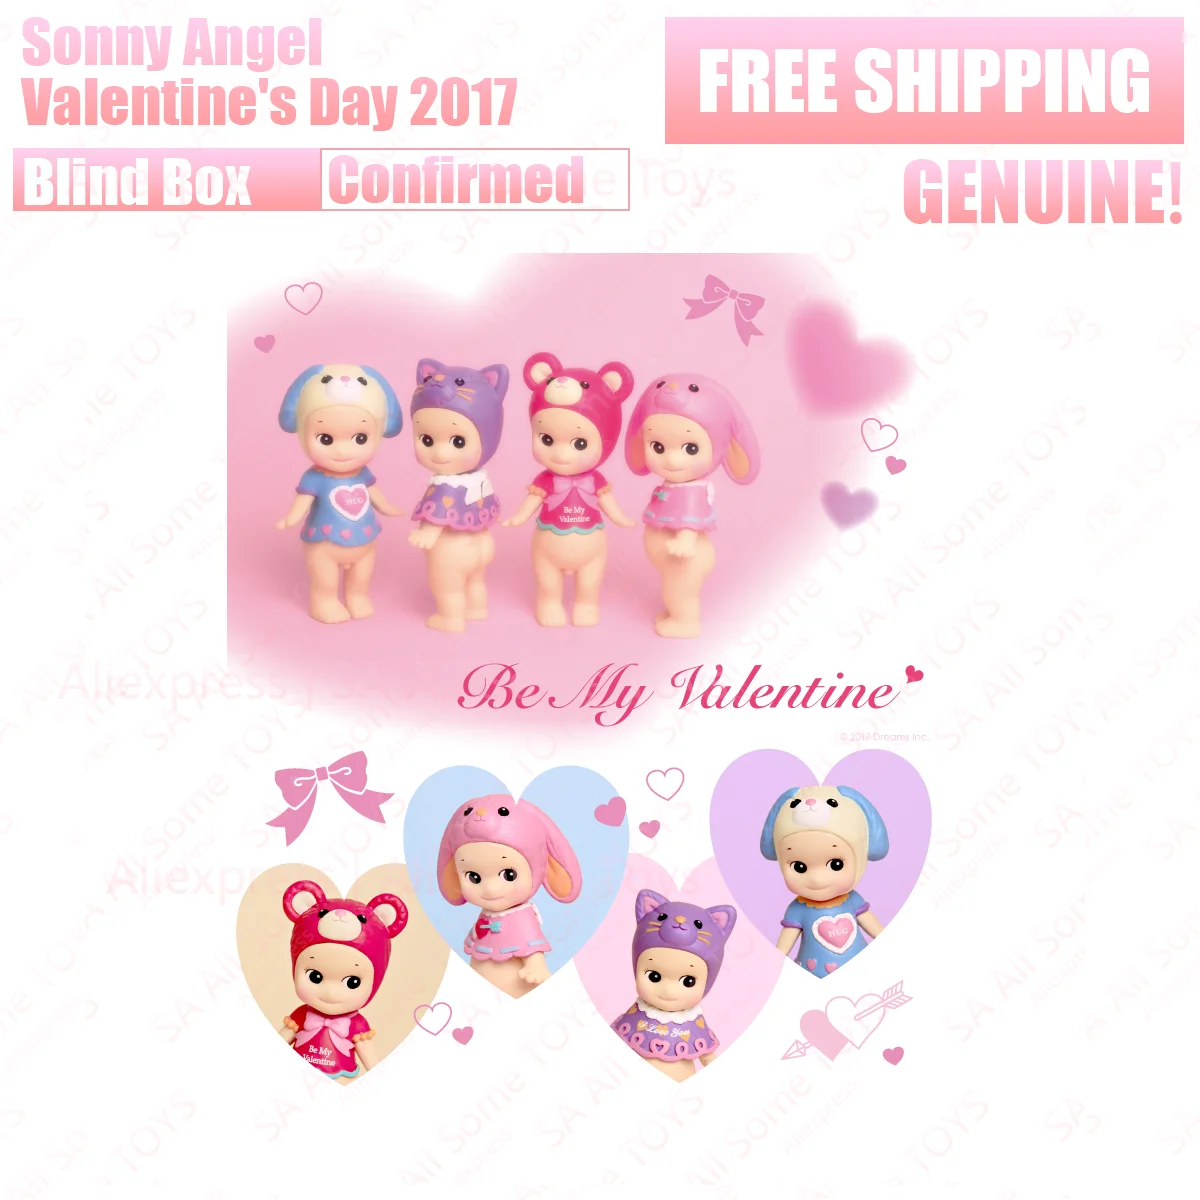 

Sonny Angel Valentine's Day 2017 Blind Box Confirmed style Genuine telephone Screen Decoration Birthday Gift Mysterious Surprise